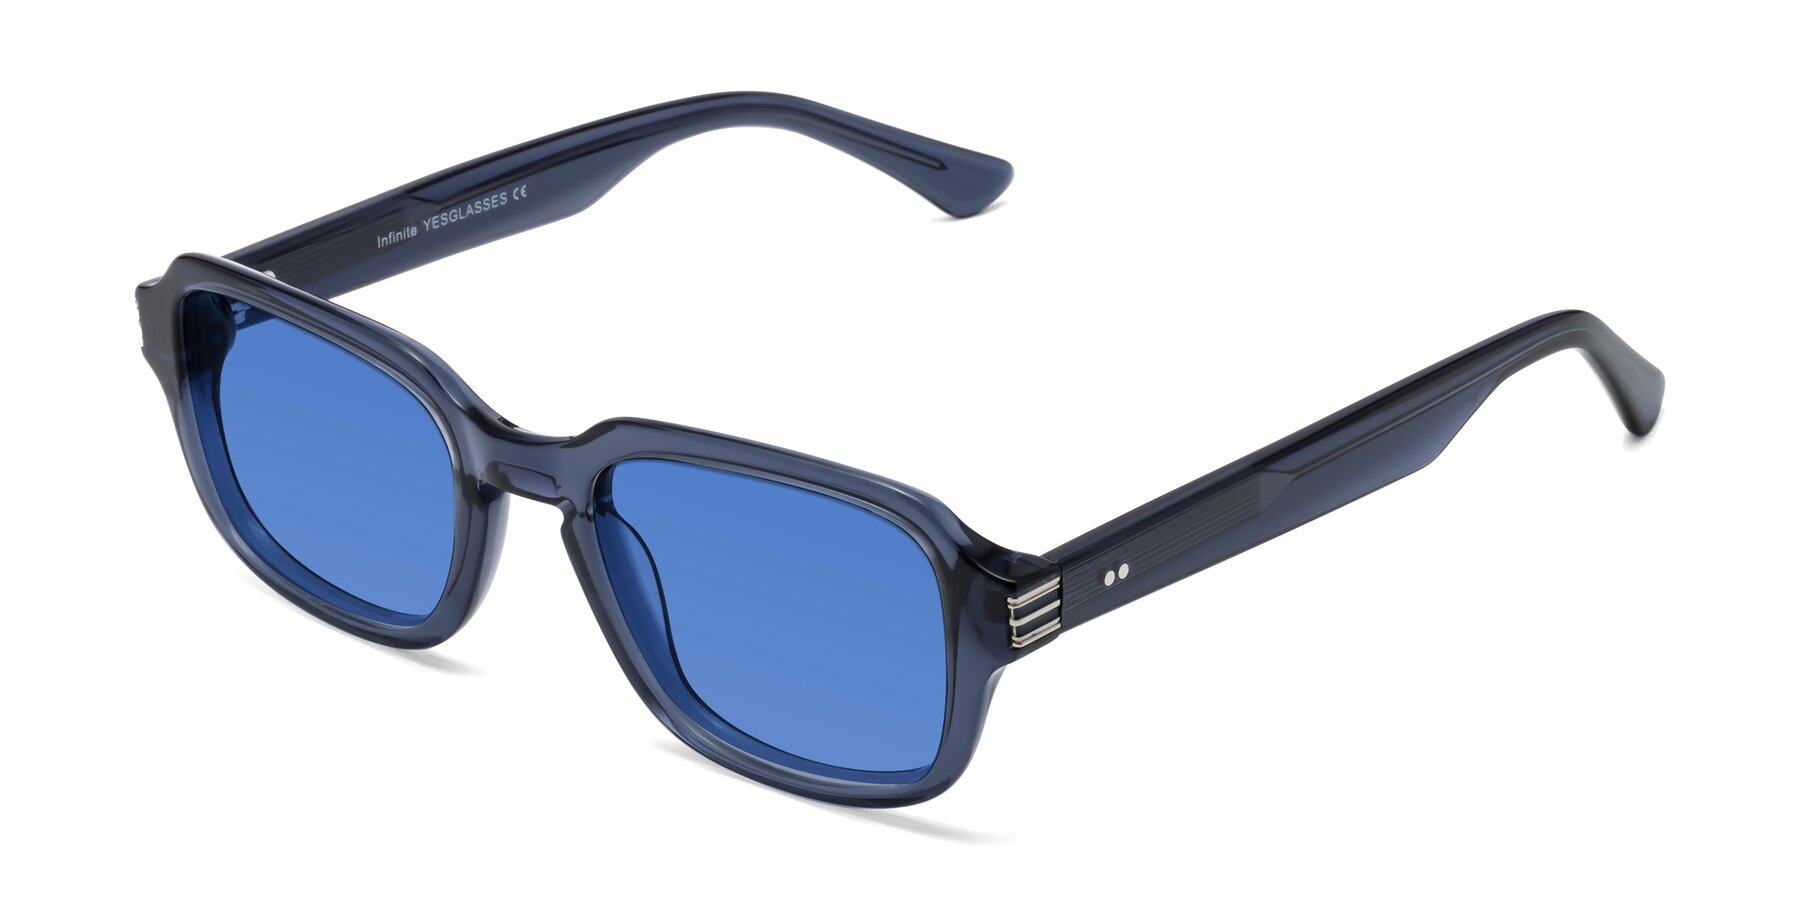 Angle of Infinite in Dark Blue with Blue Tinted Lenses